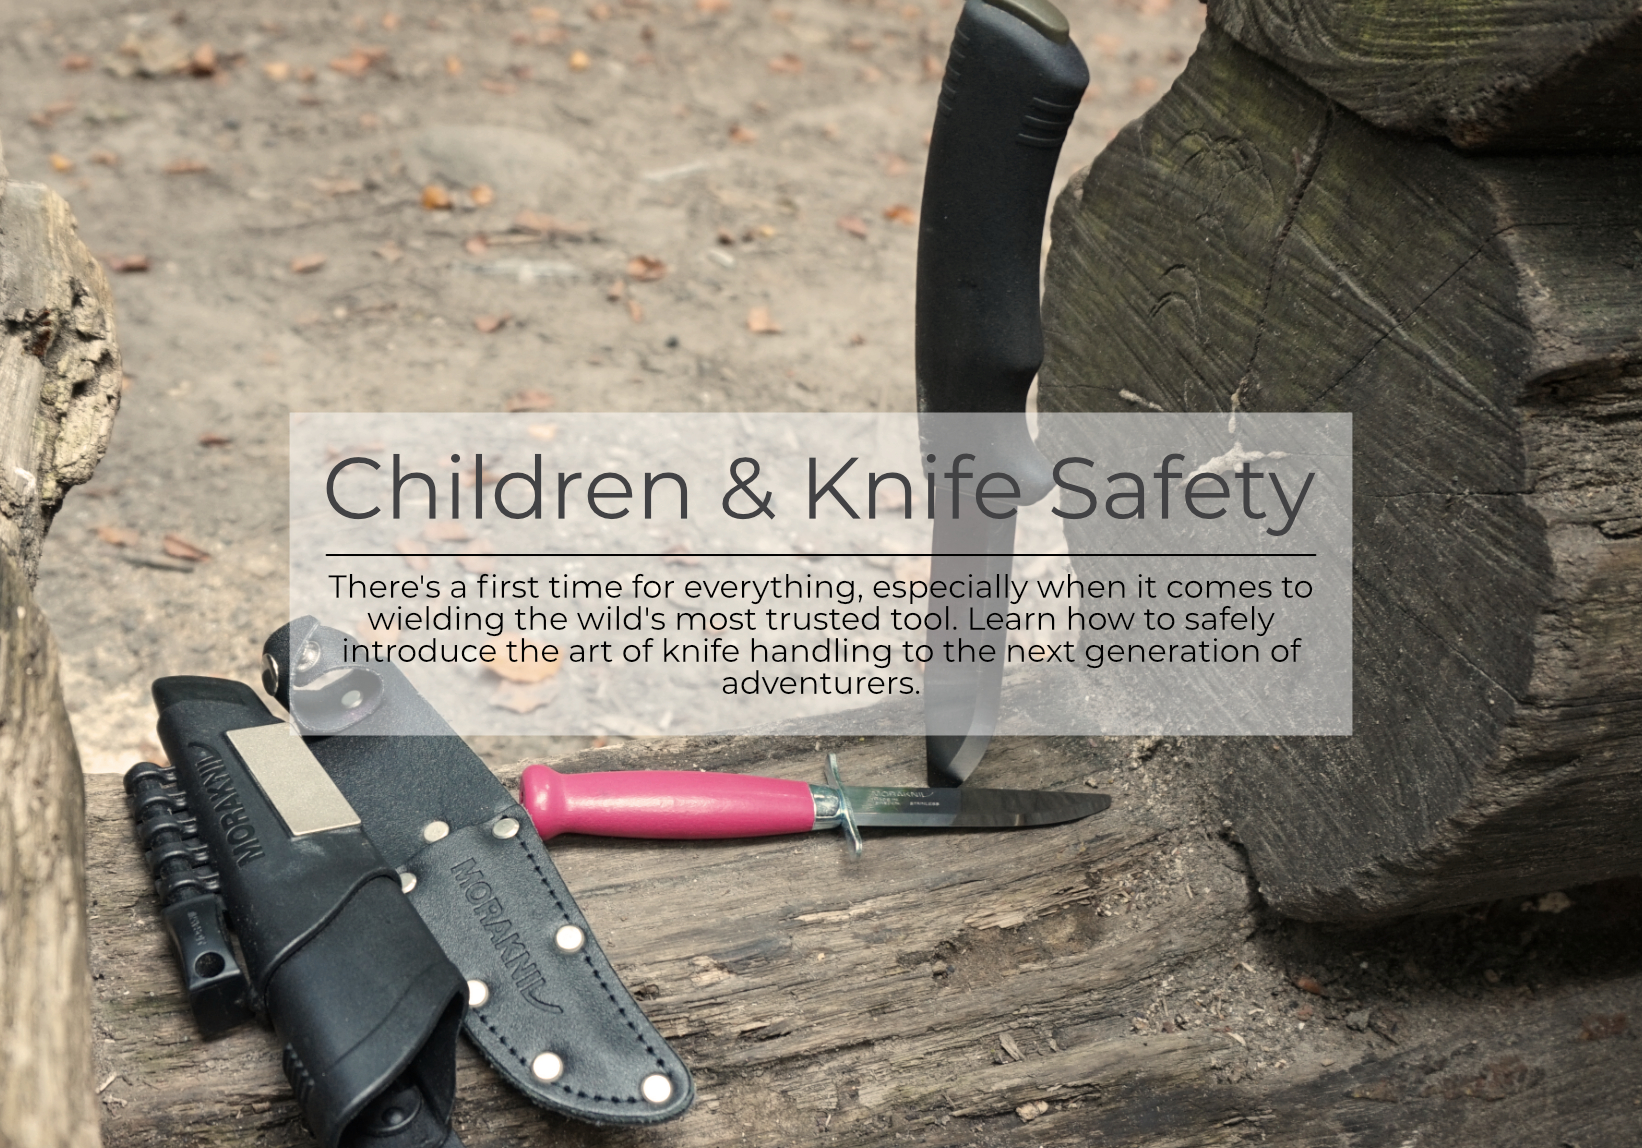 Knife safety and Children